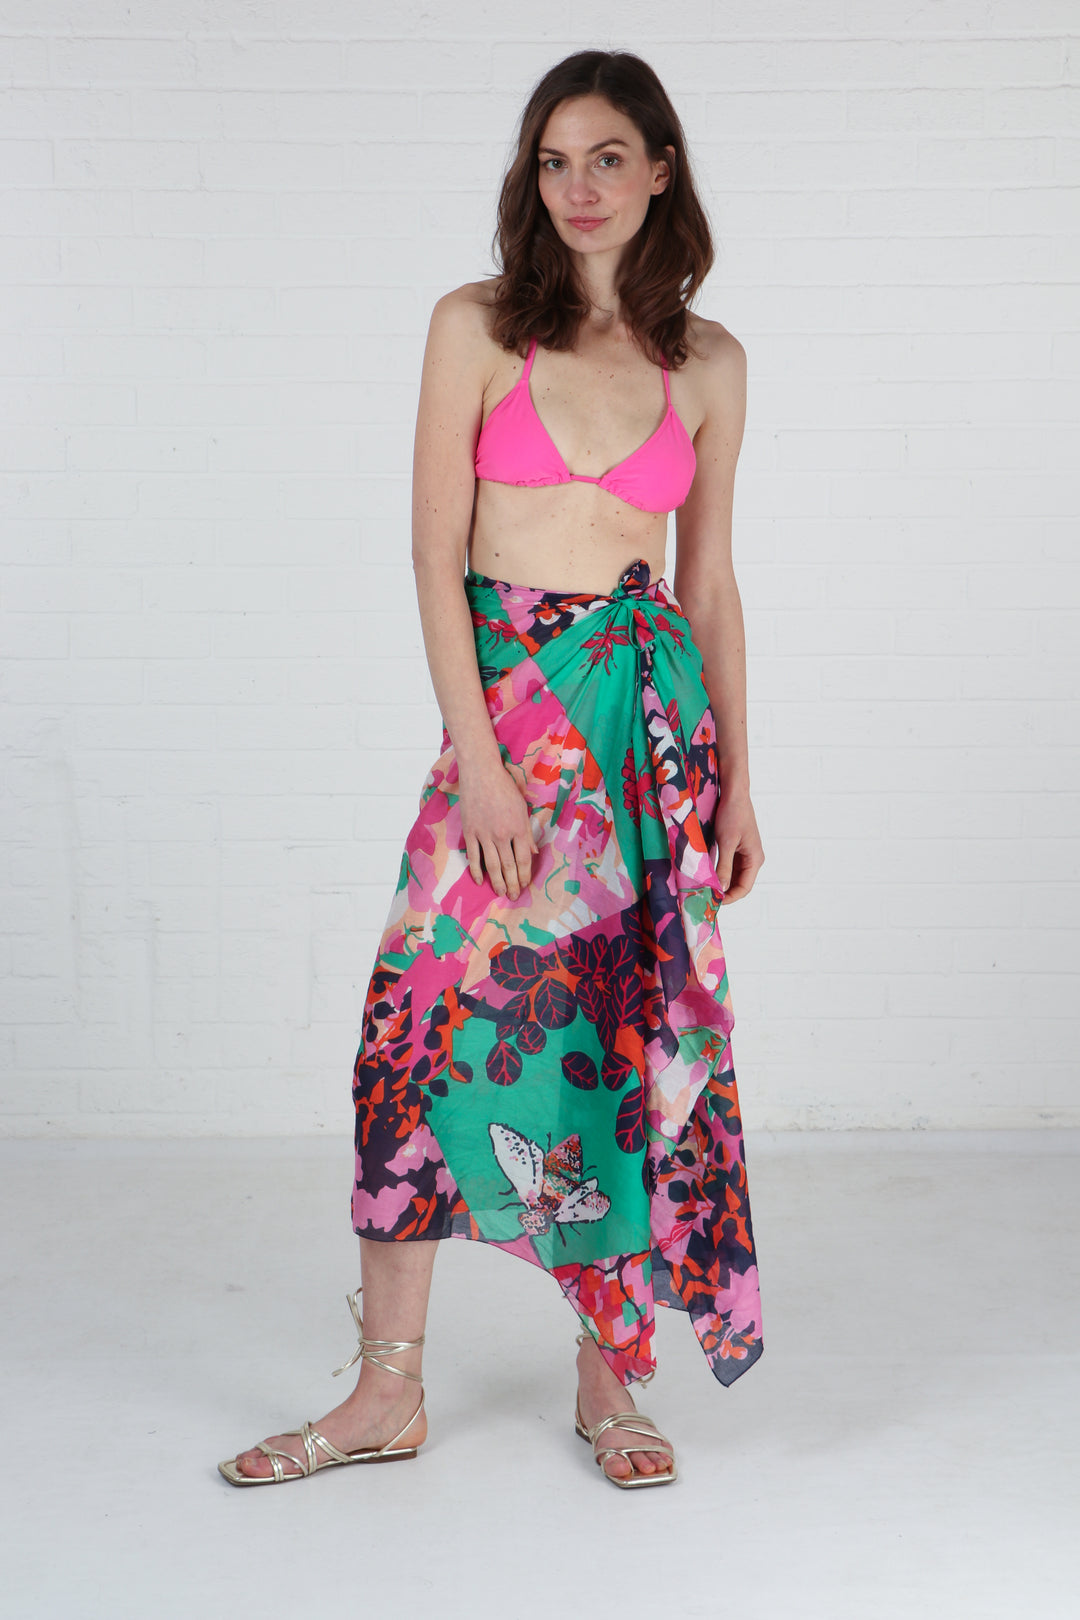 model wearing this green and pink cotton scarf as a beach coverup wrap